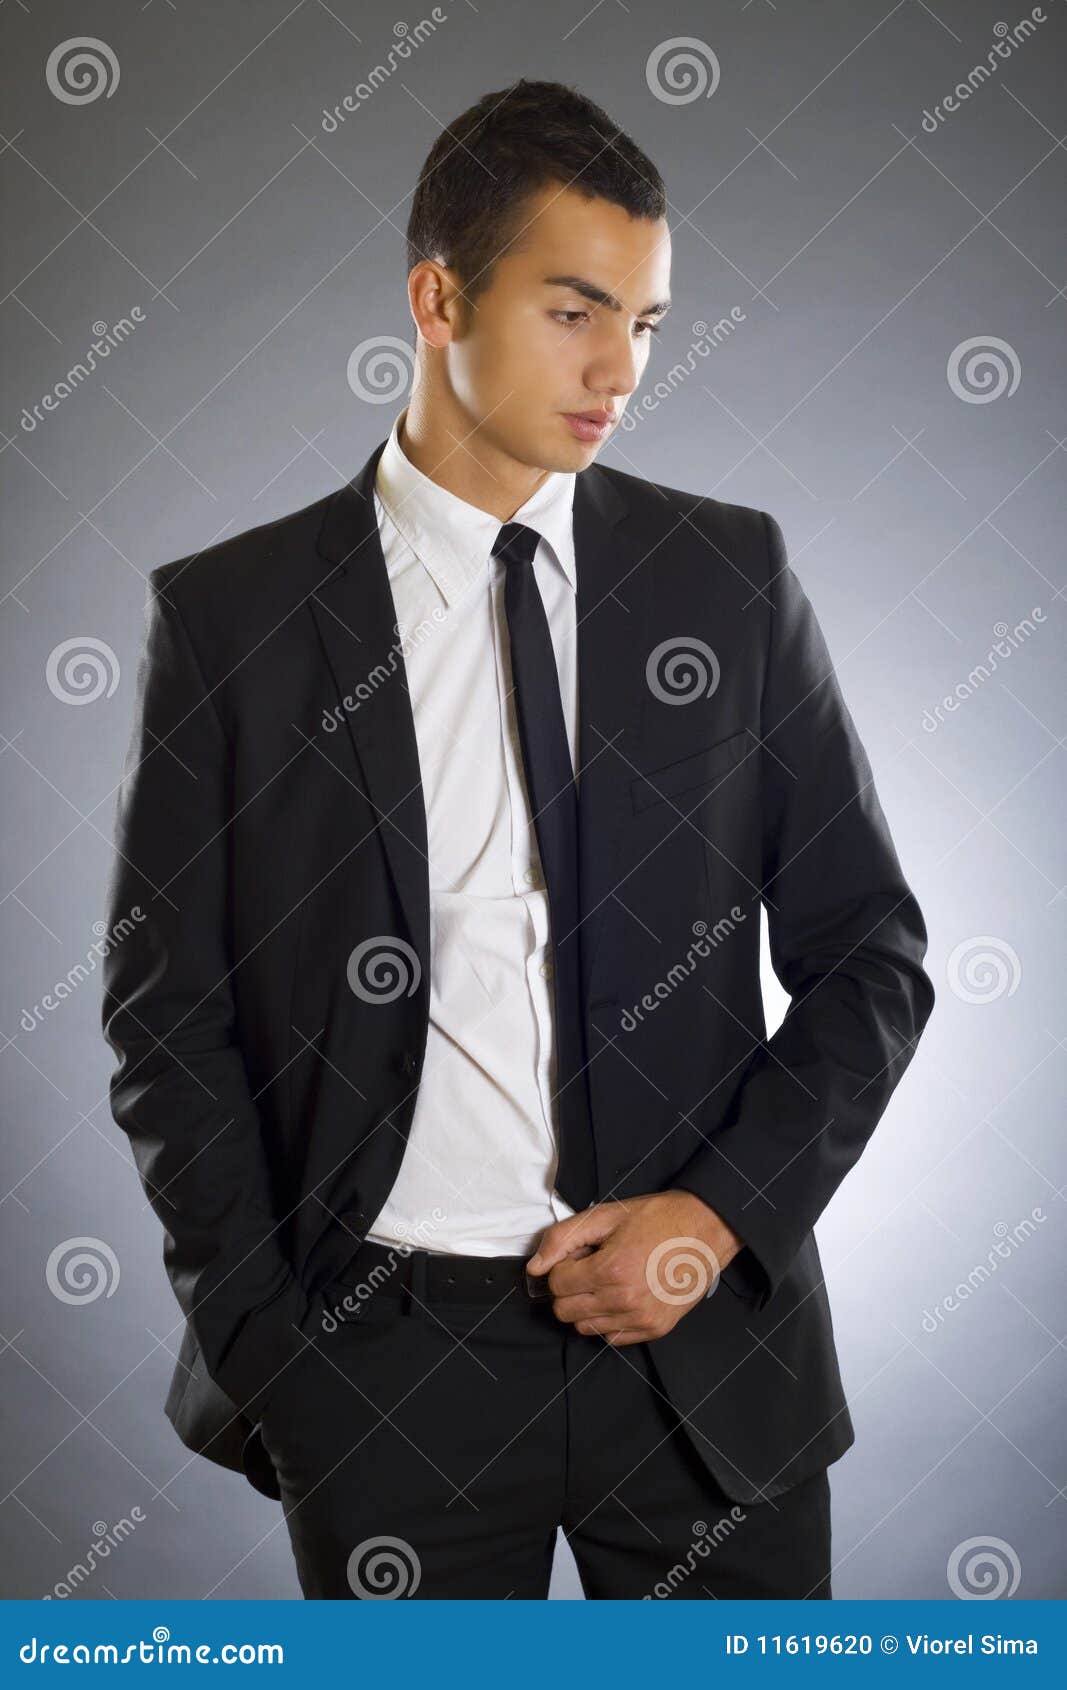 Young Business Man Isolated Over Dark Background Stock Photo - Image of ...